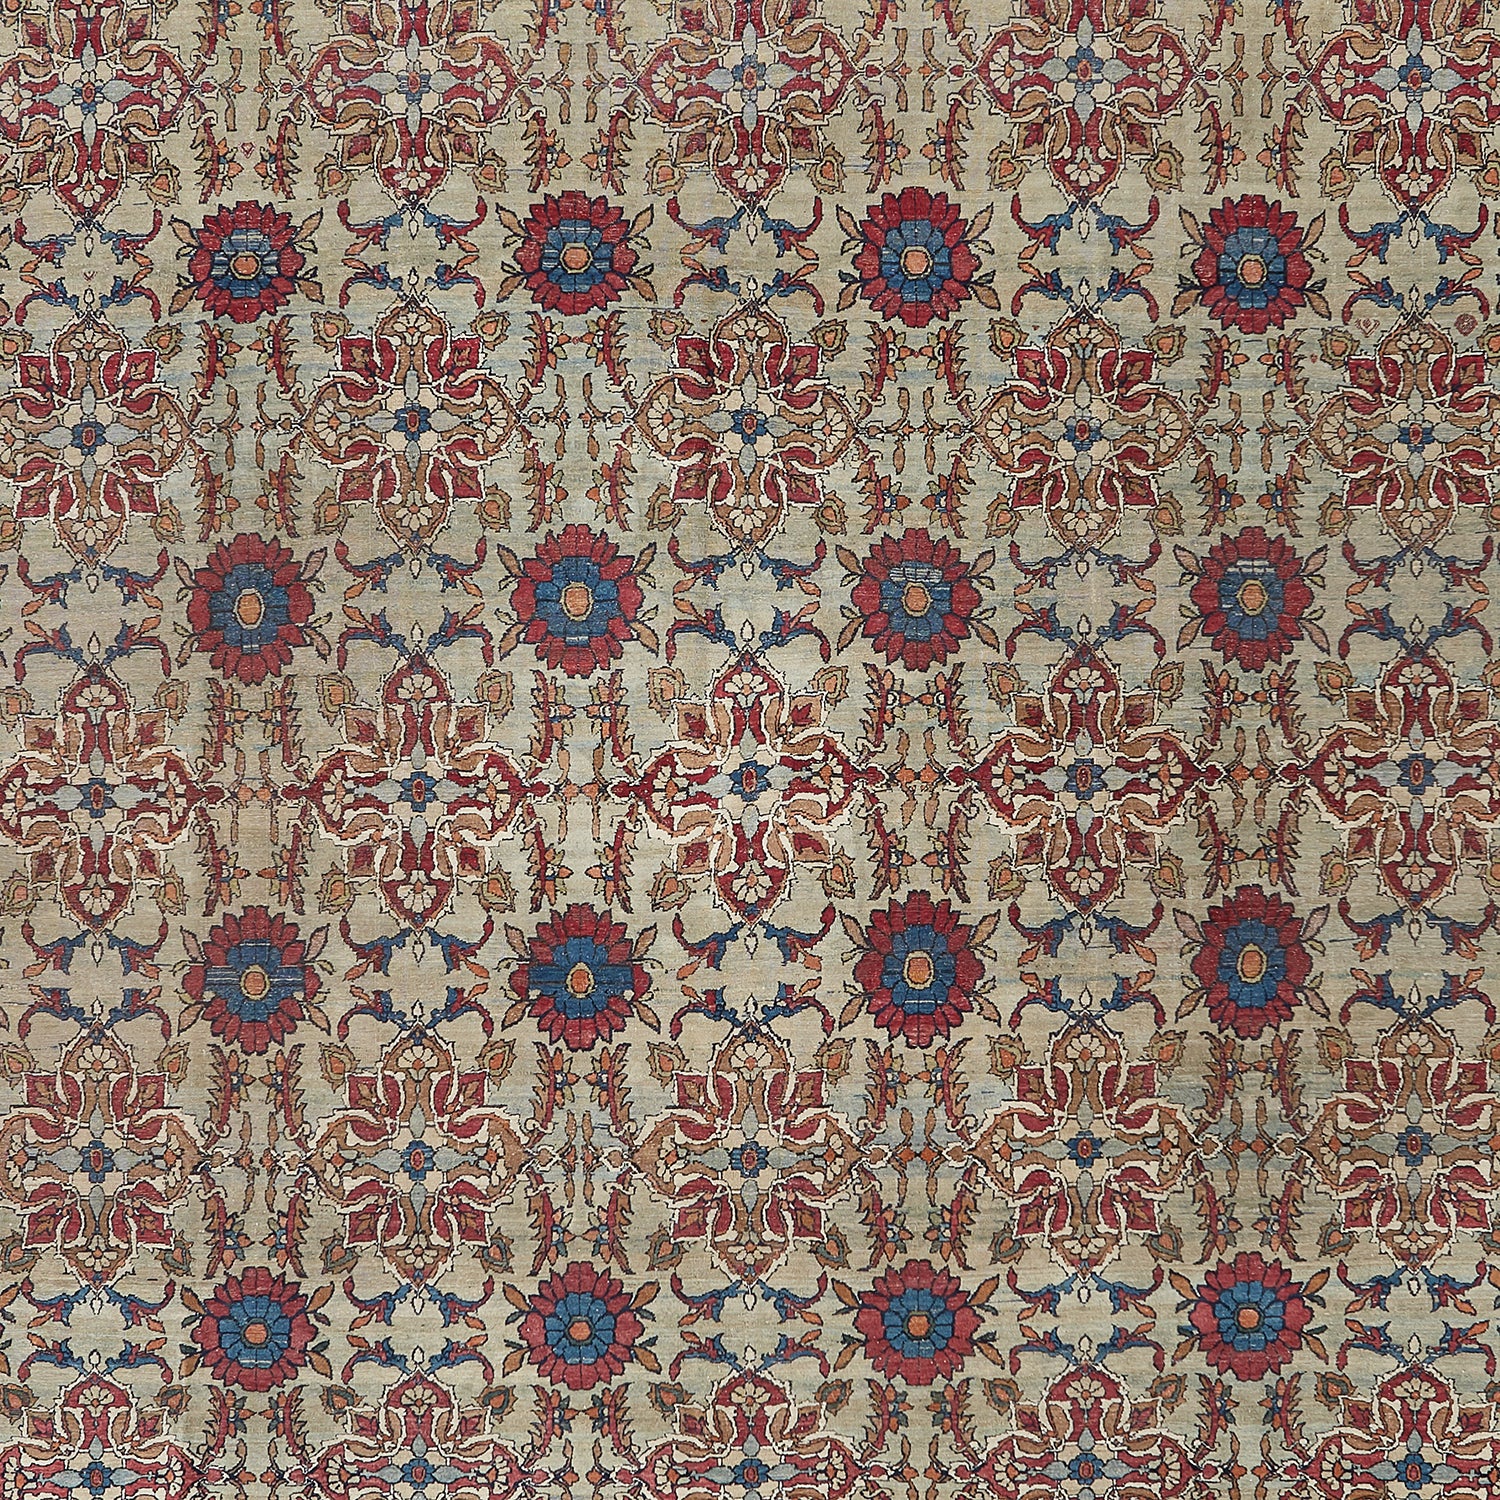 Intricate, stylized fabric pattern with symmetrical floral motifs in red and blue.